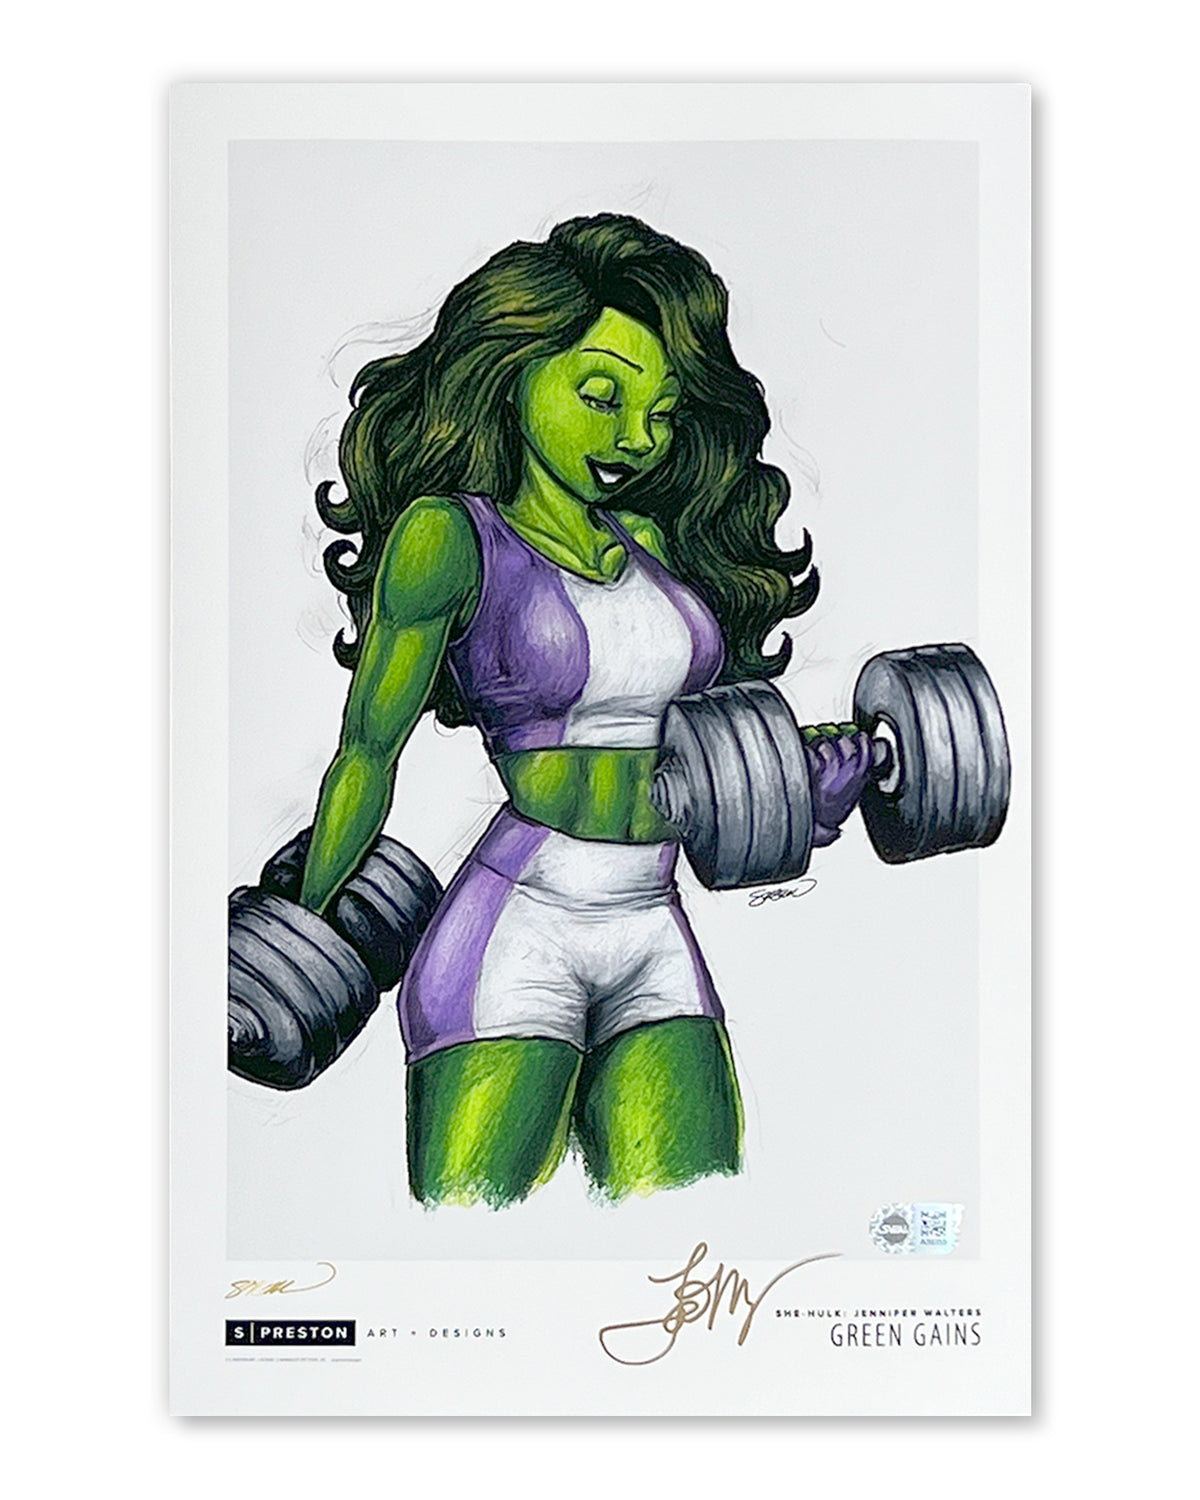 Green Gains - She-Hulk Tatiana Maslany Autographed Sketch Poster Print- Authenticated